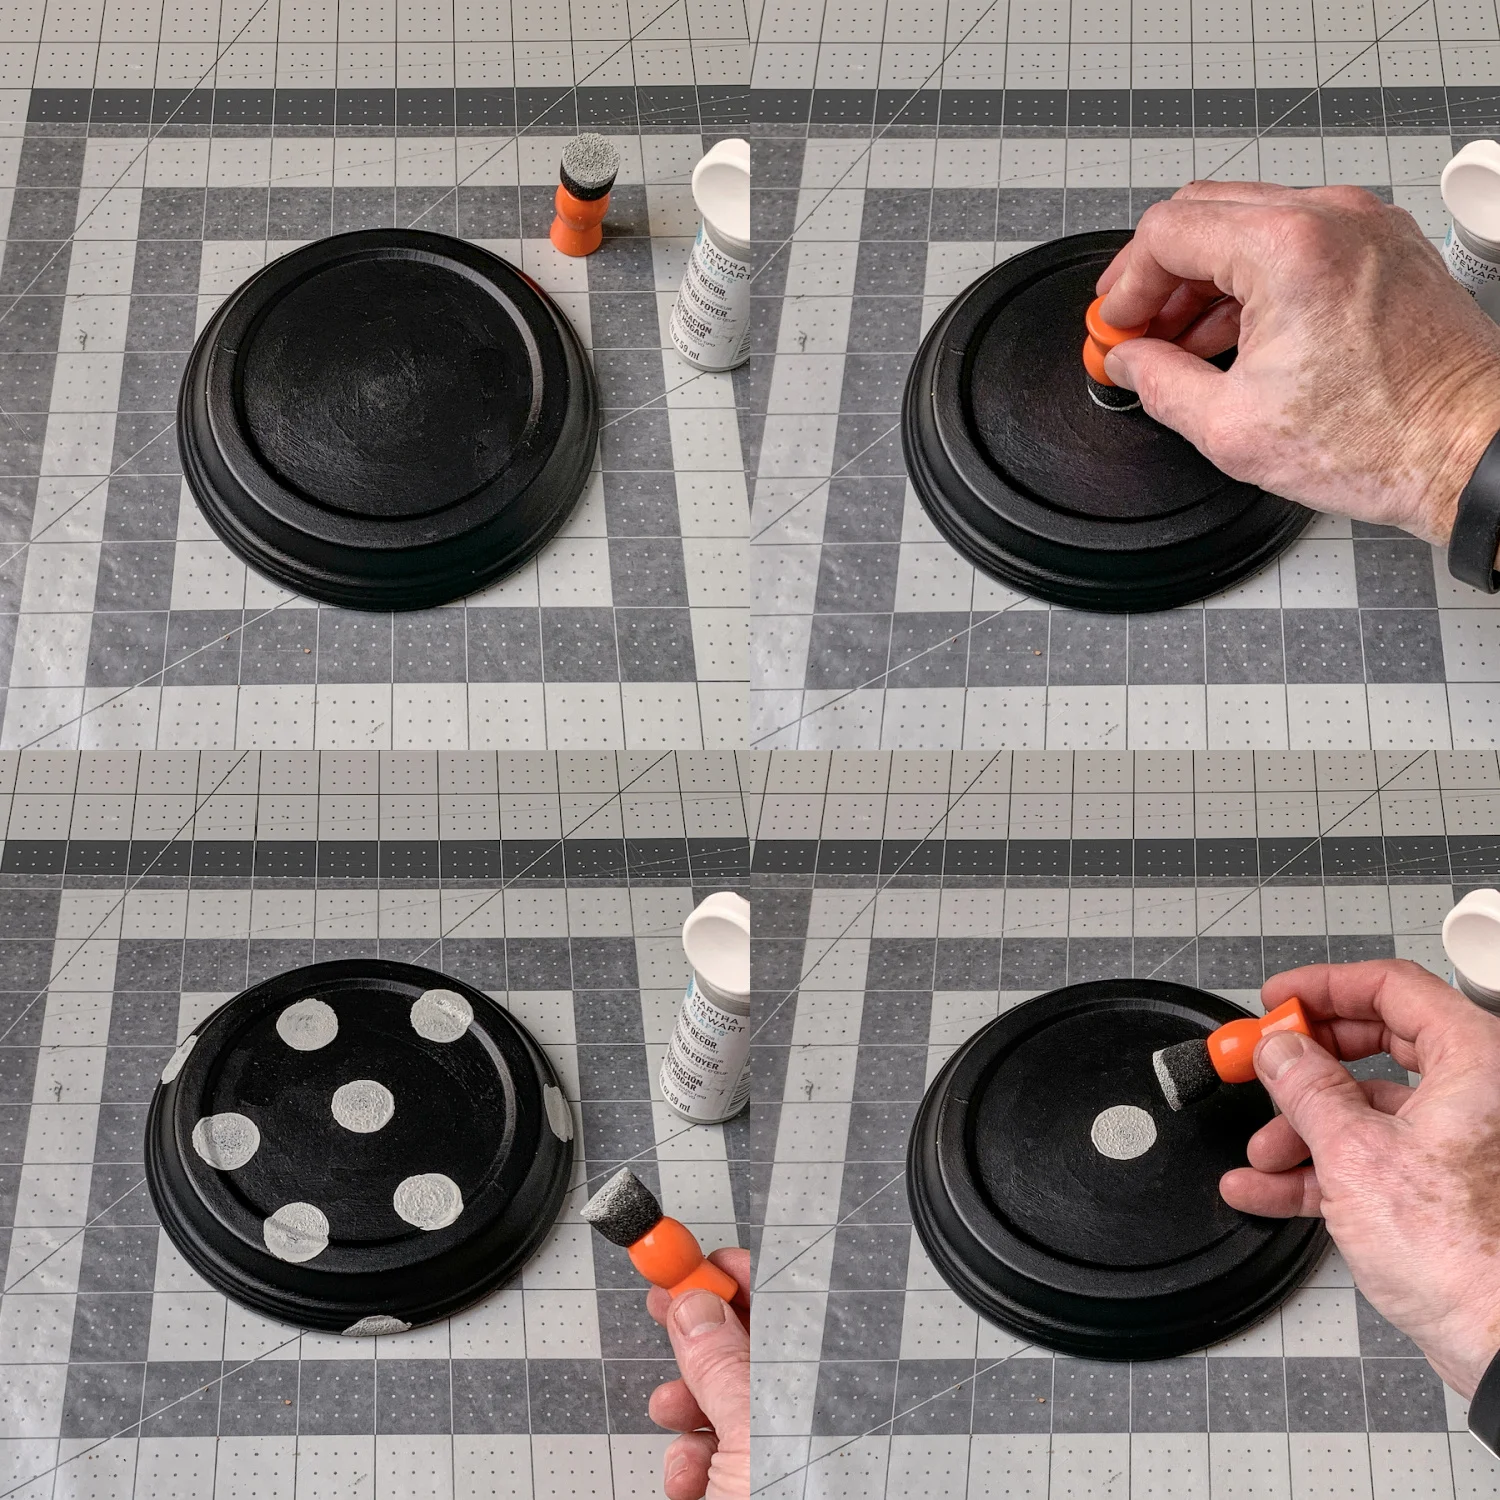 Painting gray dots onto a painted black plant saucer